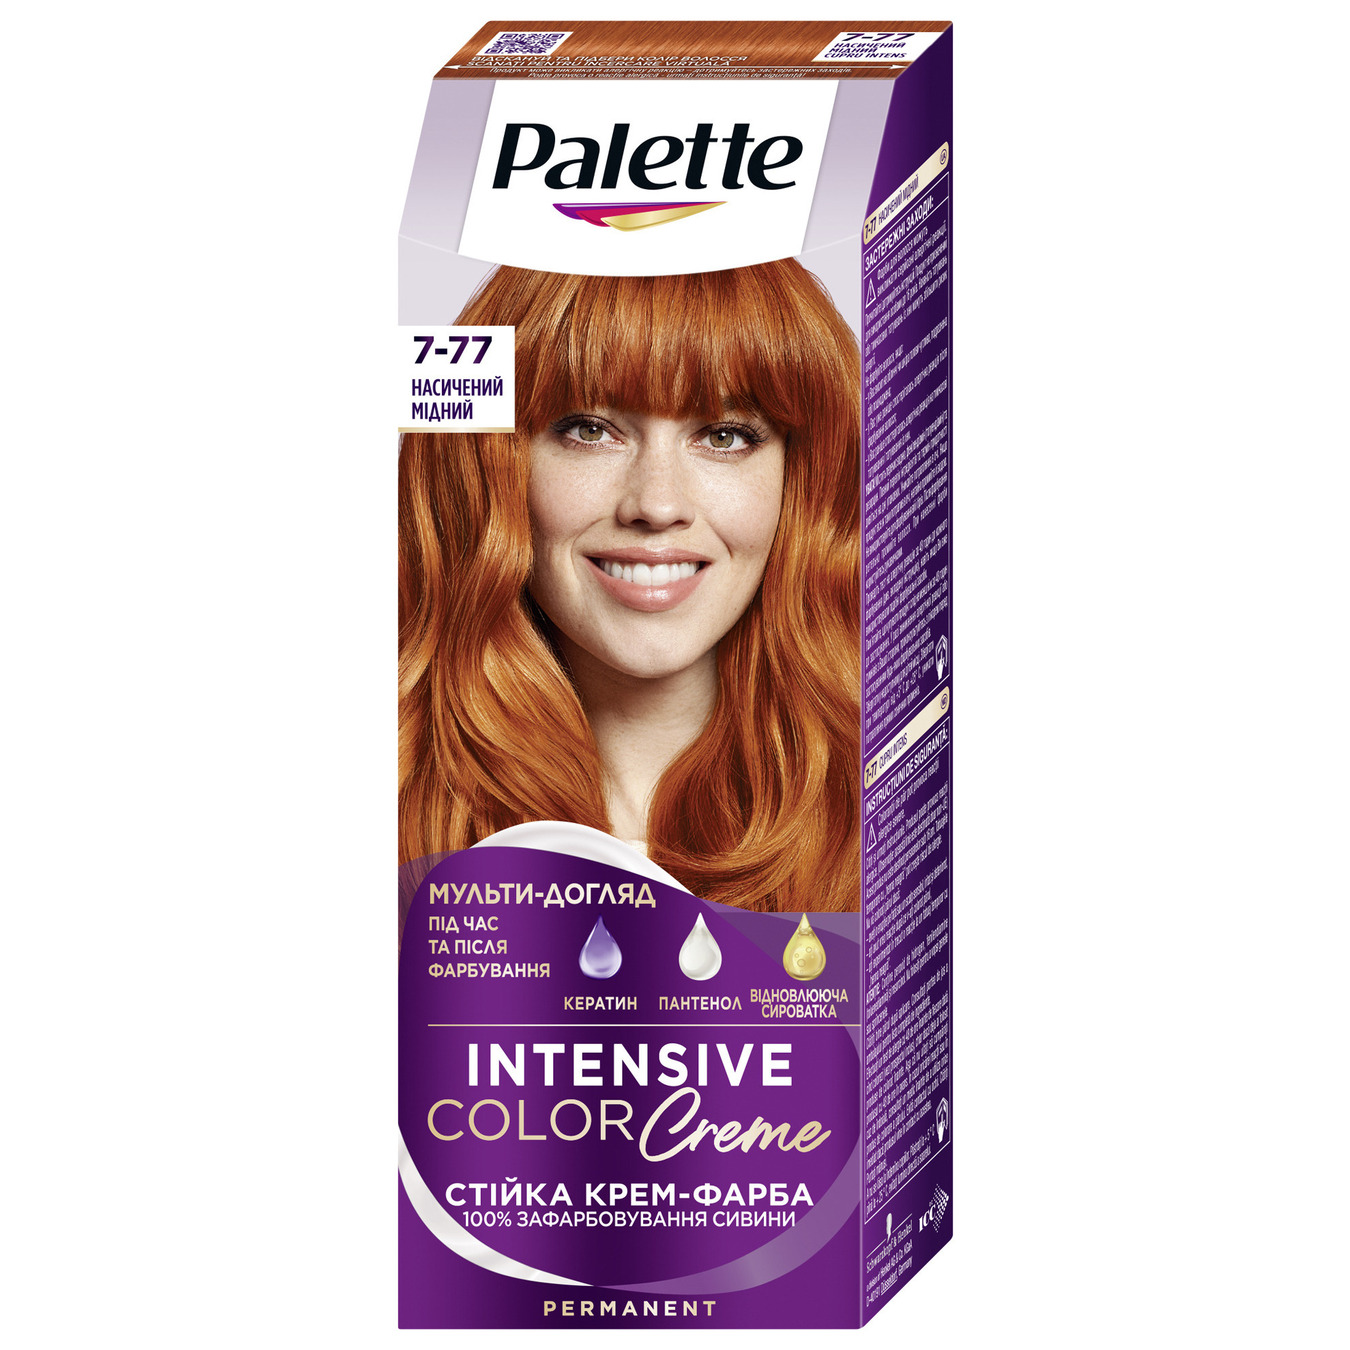 Palette Hair color ICC 7-77 saturated copper